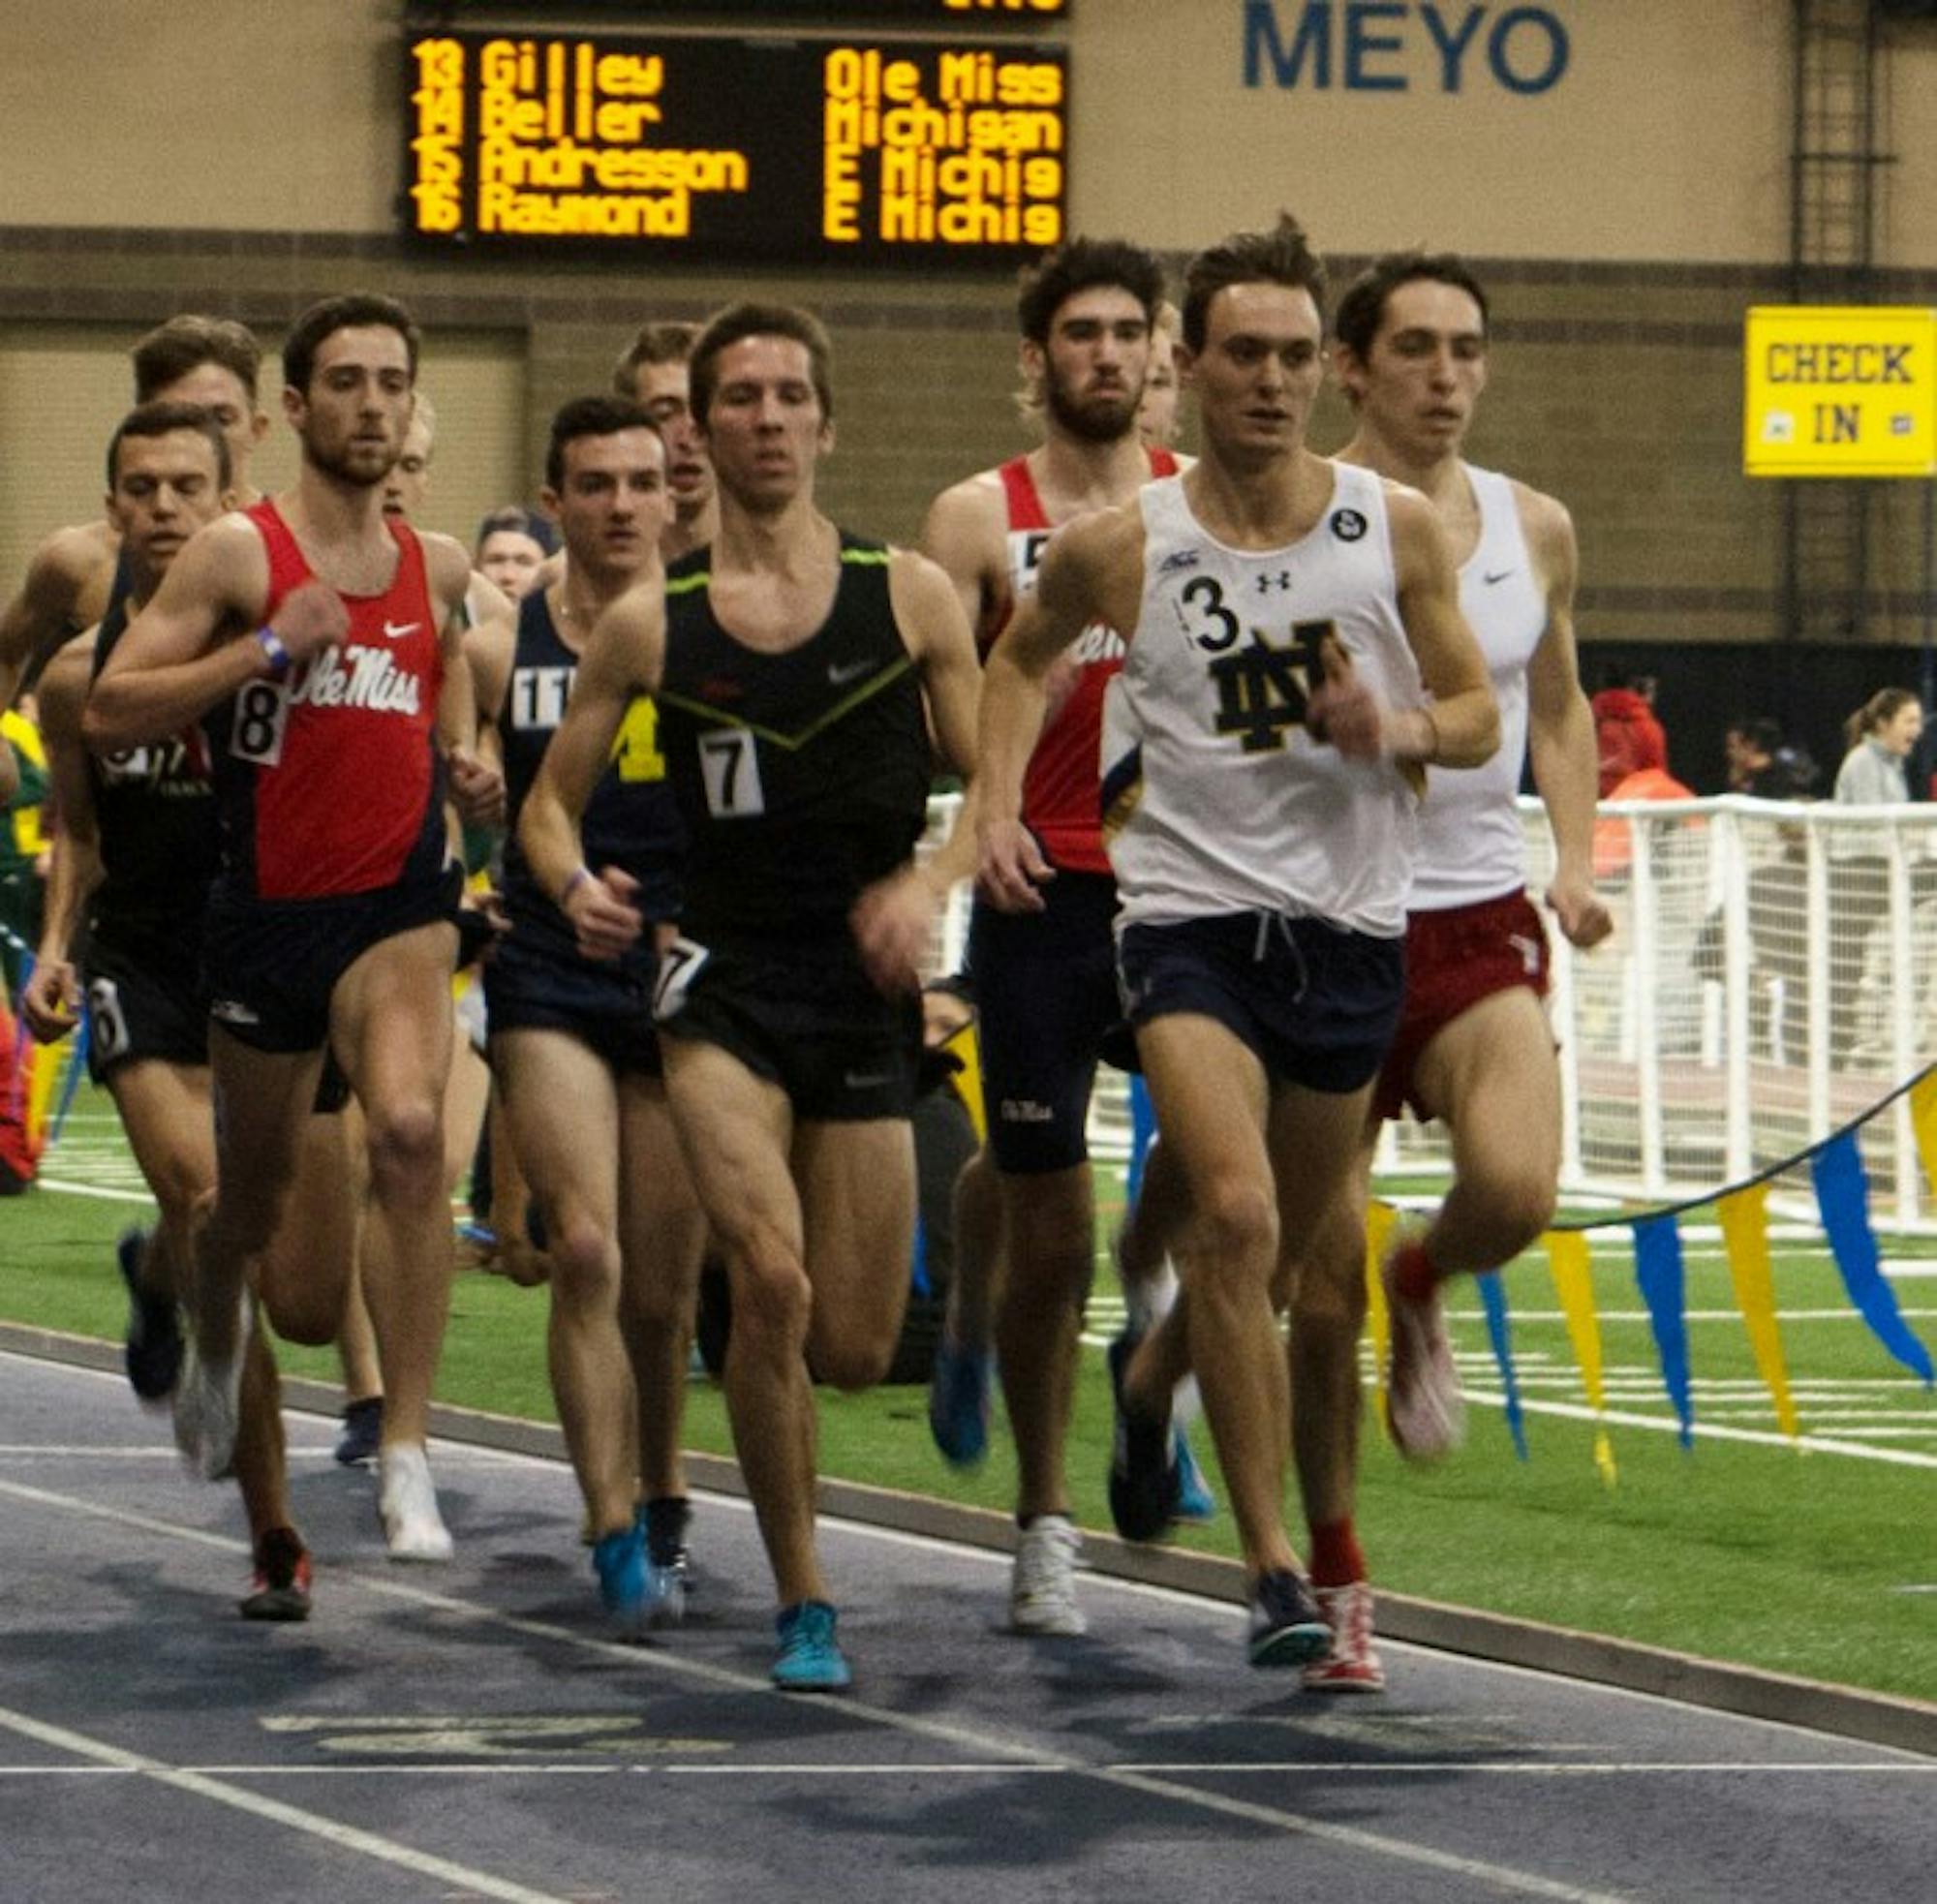 Senior Michael Clevenger leads a pack of runners during the 3,000-meter run at Loftus Sports Center on Saturday afternoon. Clevenger finished the event with a time of 18:15.56.